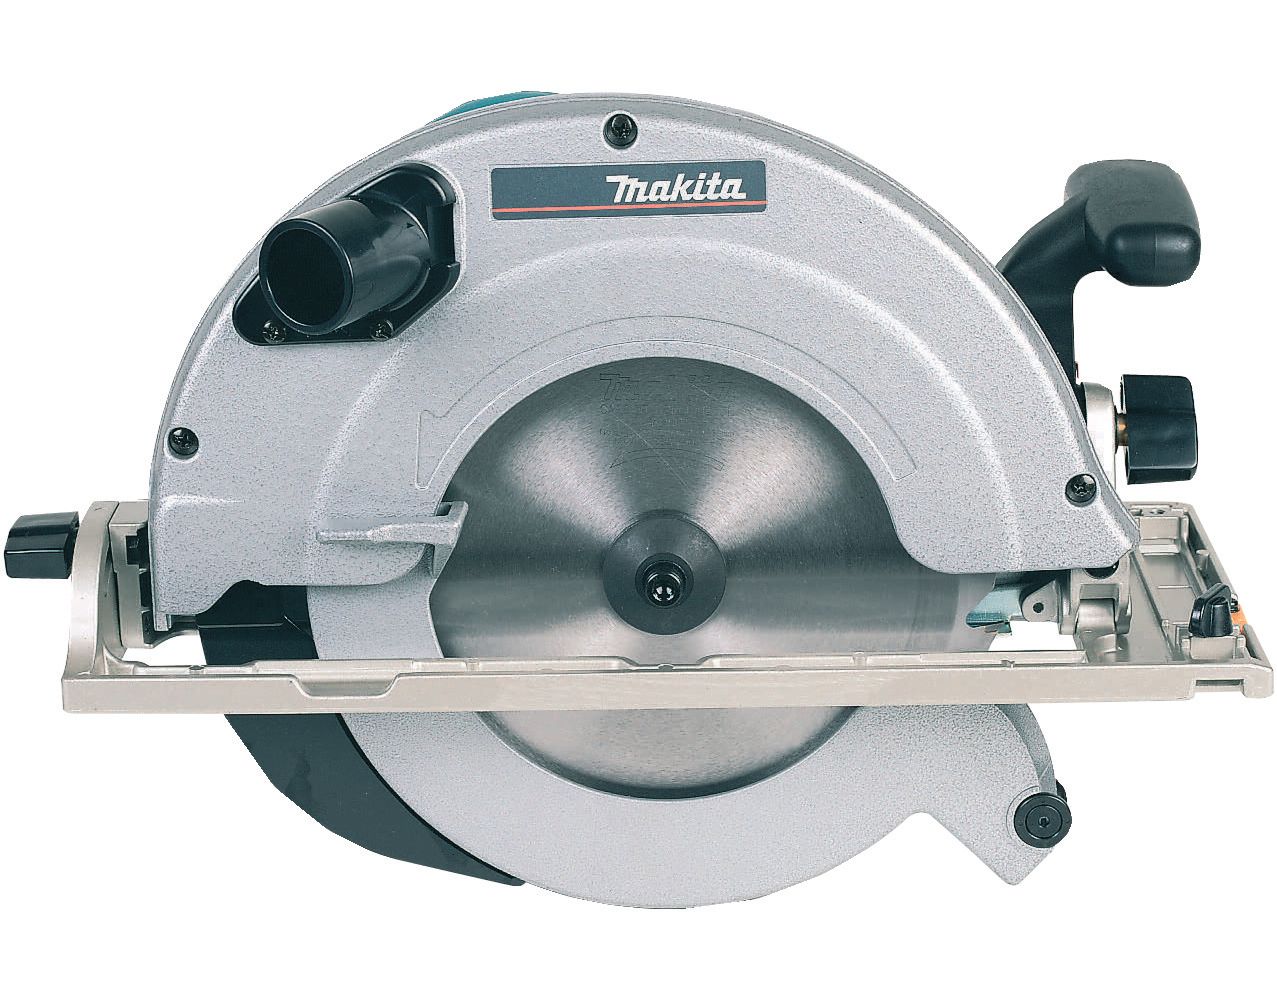 Image of Makita 5903RK 235mm Corded Circular Saw With Case 240V - 1550W